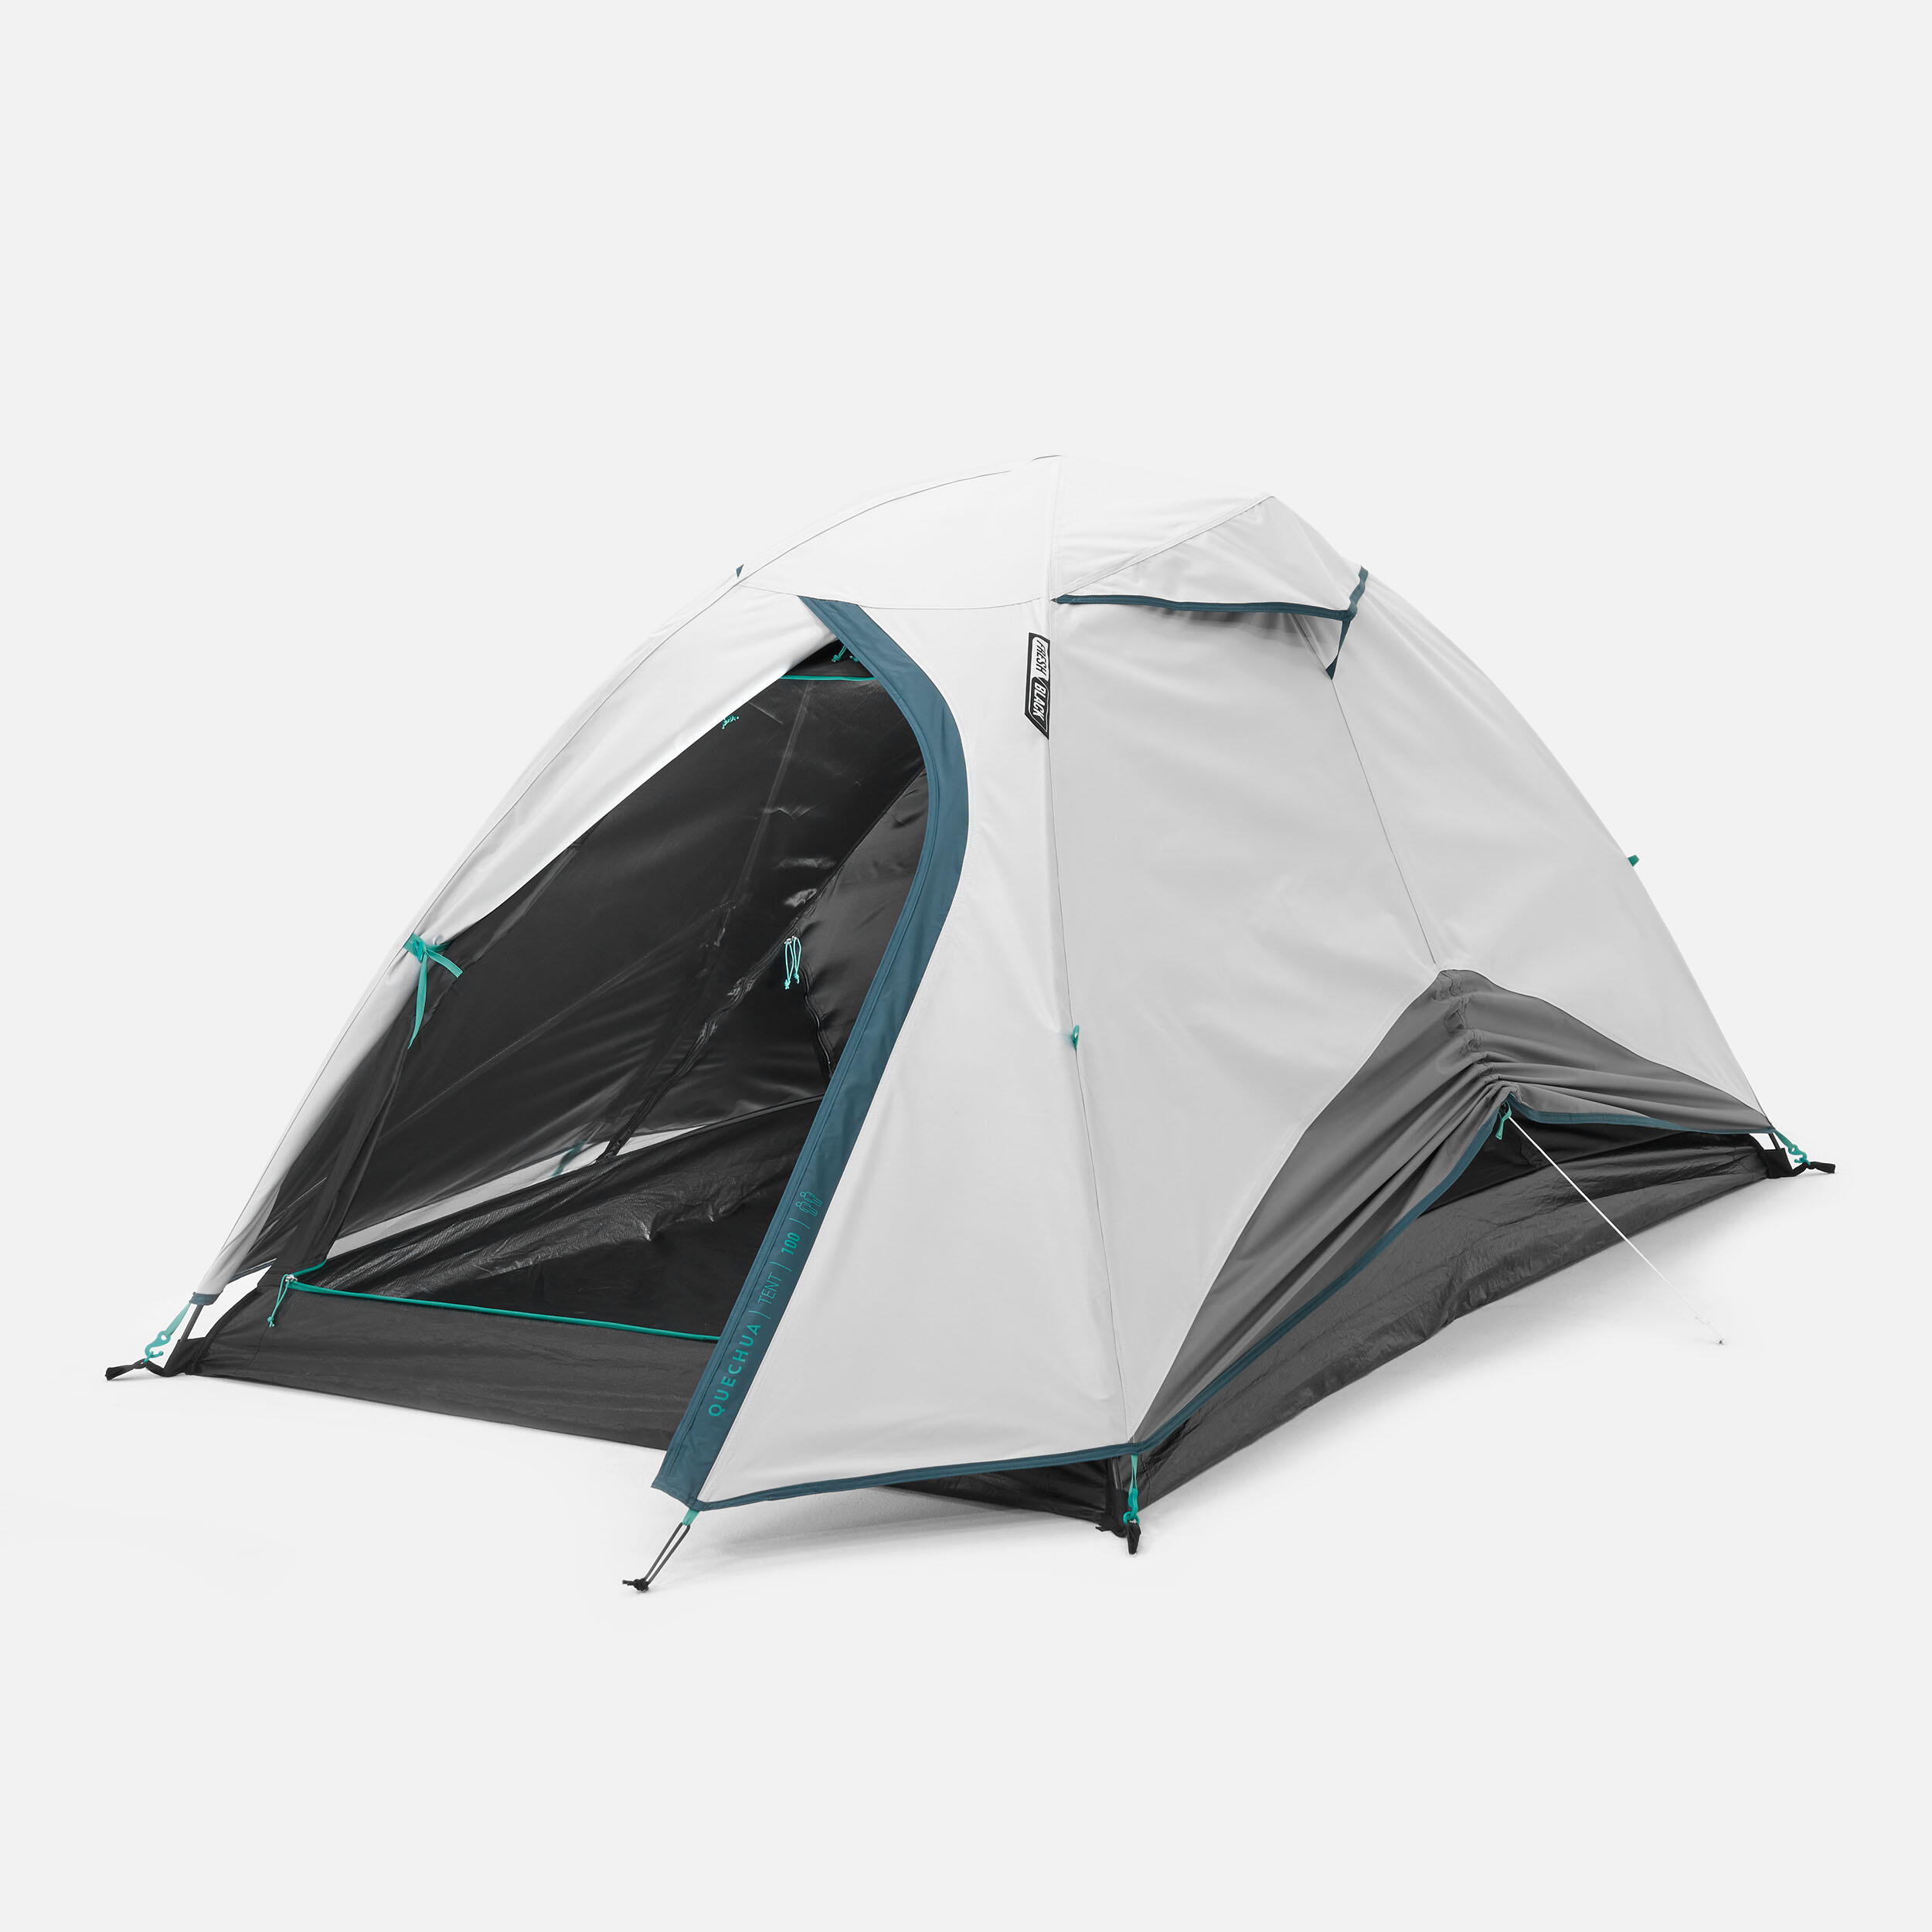 Camping Tent MH100 - 2-Person - Fresh&Black 6/22